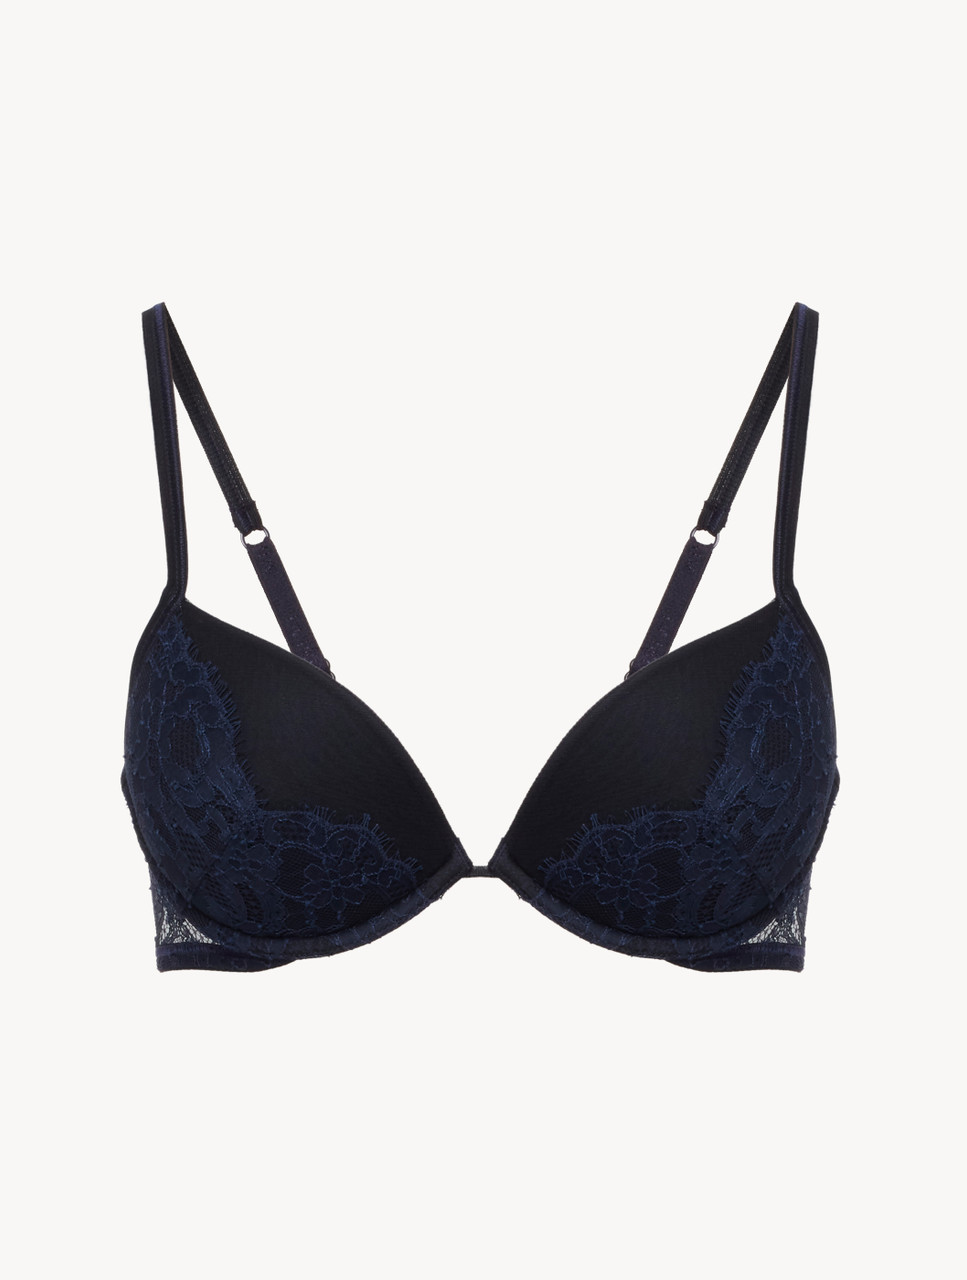 Push-Up Bra in Steel Blue and Black with Leavers lace